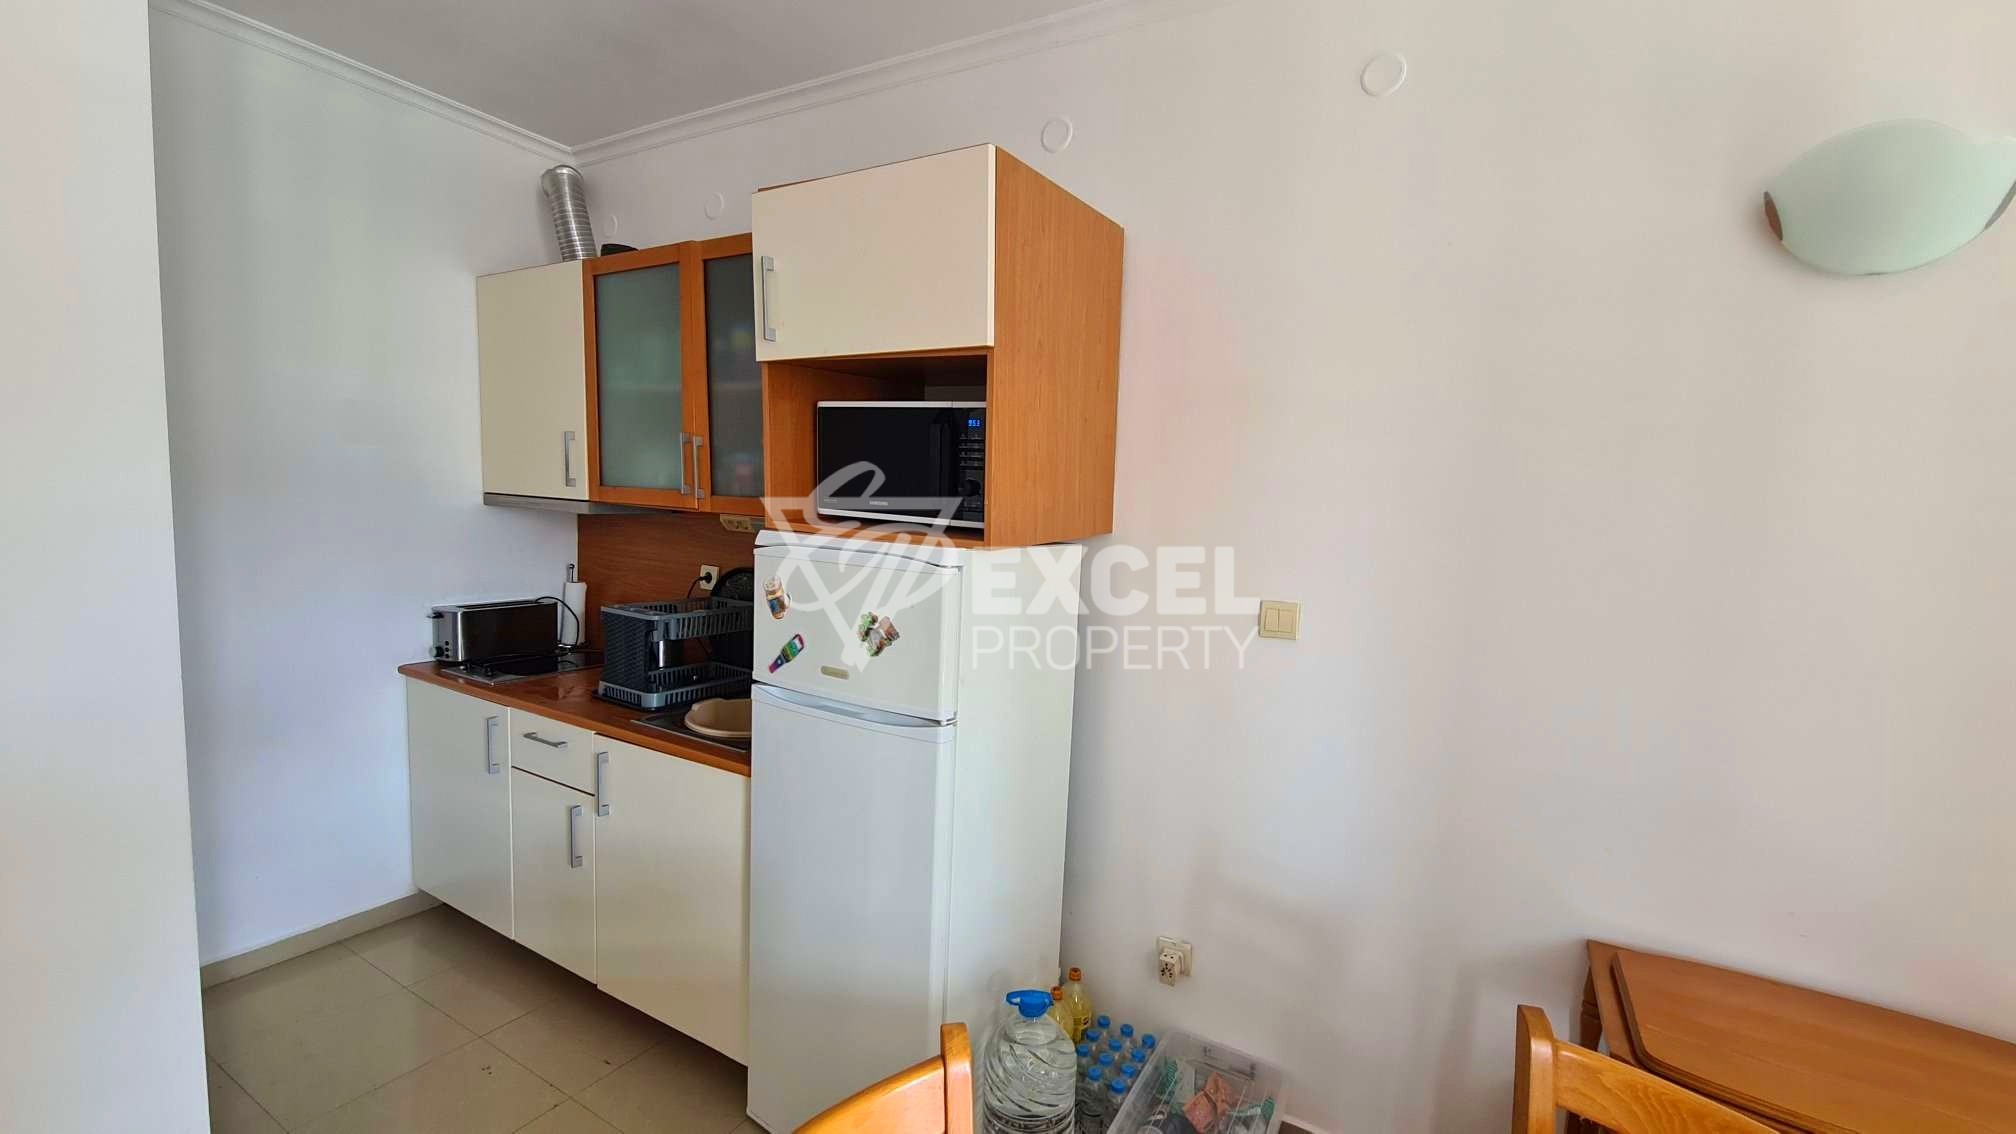 Furnished, two bedroom apartment in Sunny Beach in the Cacao Beach area.